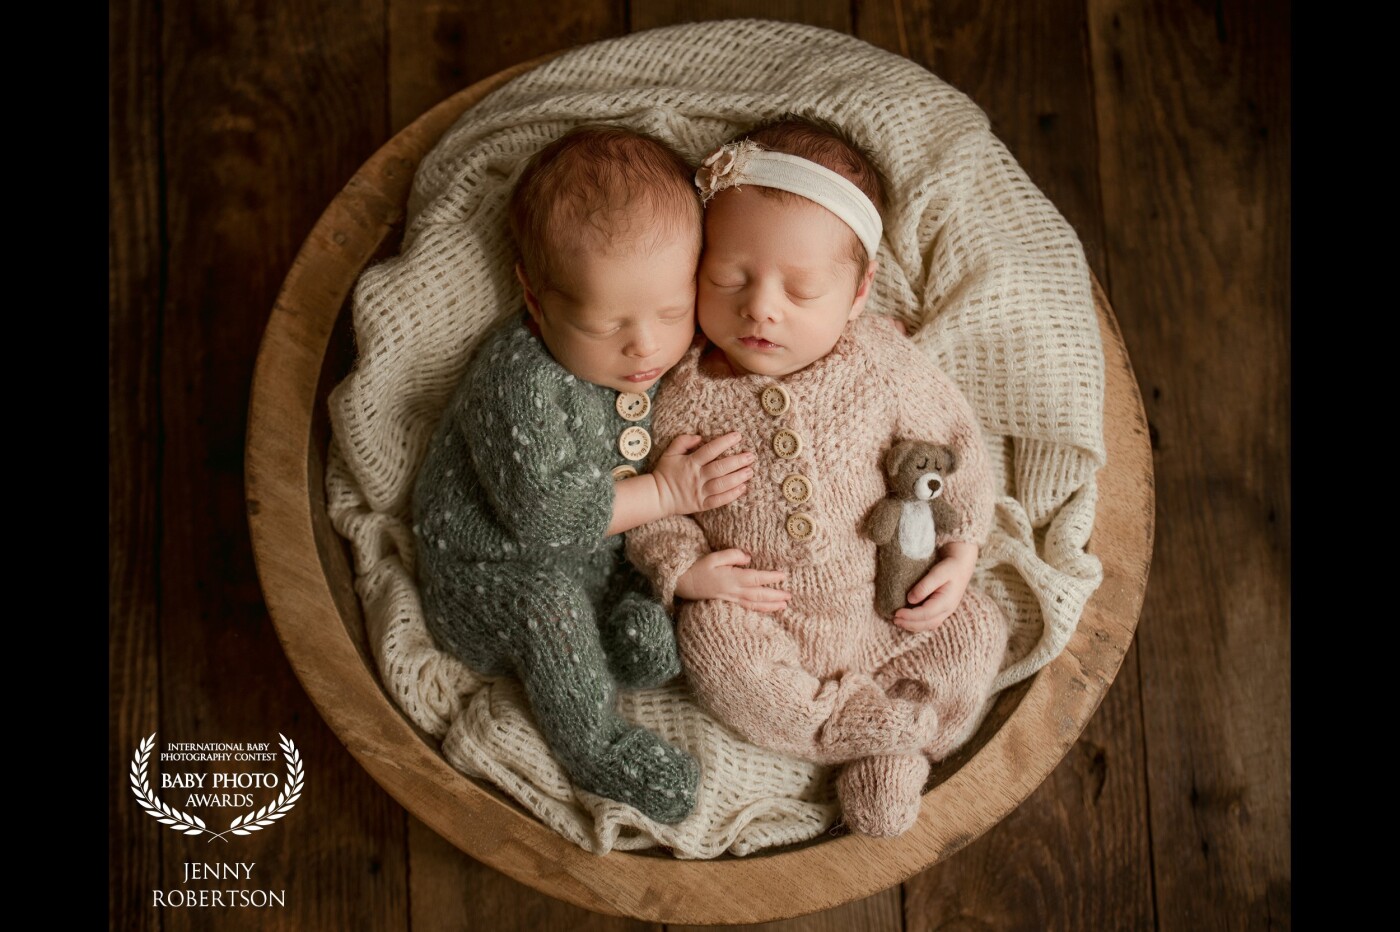 The sweetest little twins weighing in at 4 pounds each. These two only went into a deep sleep together for about a total of 15-20 minutes of their 5 hour session. They wore me out but man were they adorable and we captured some beautiful images of these little cuties.